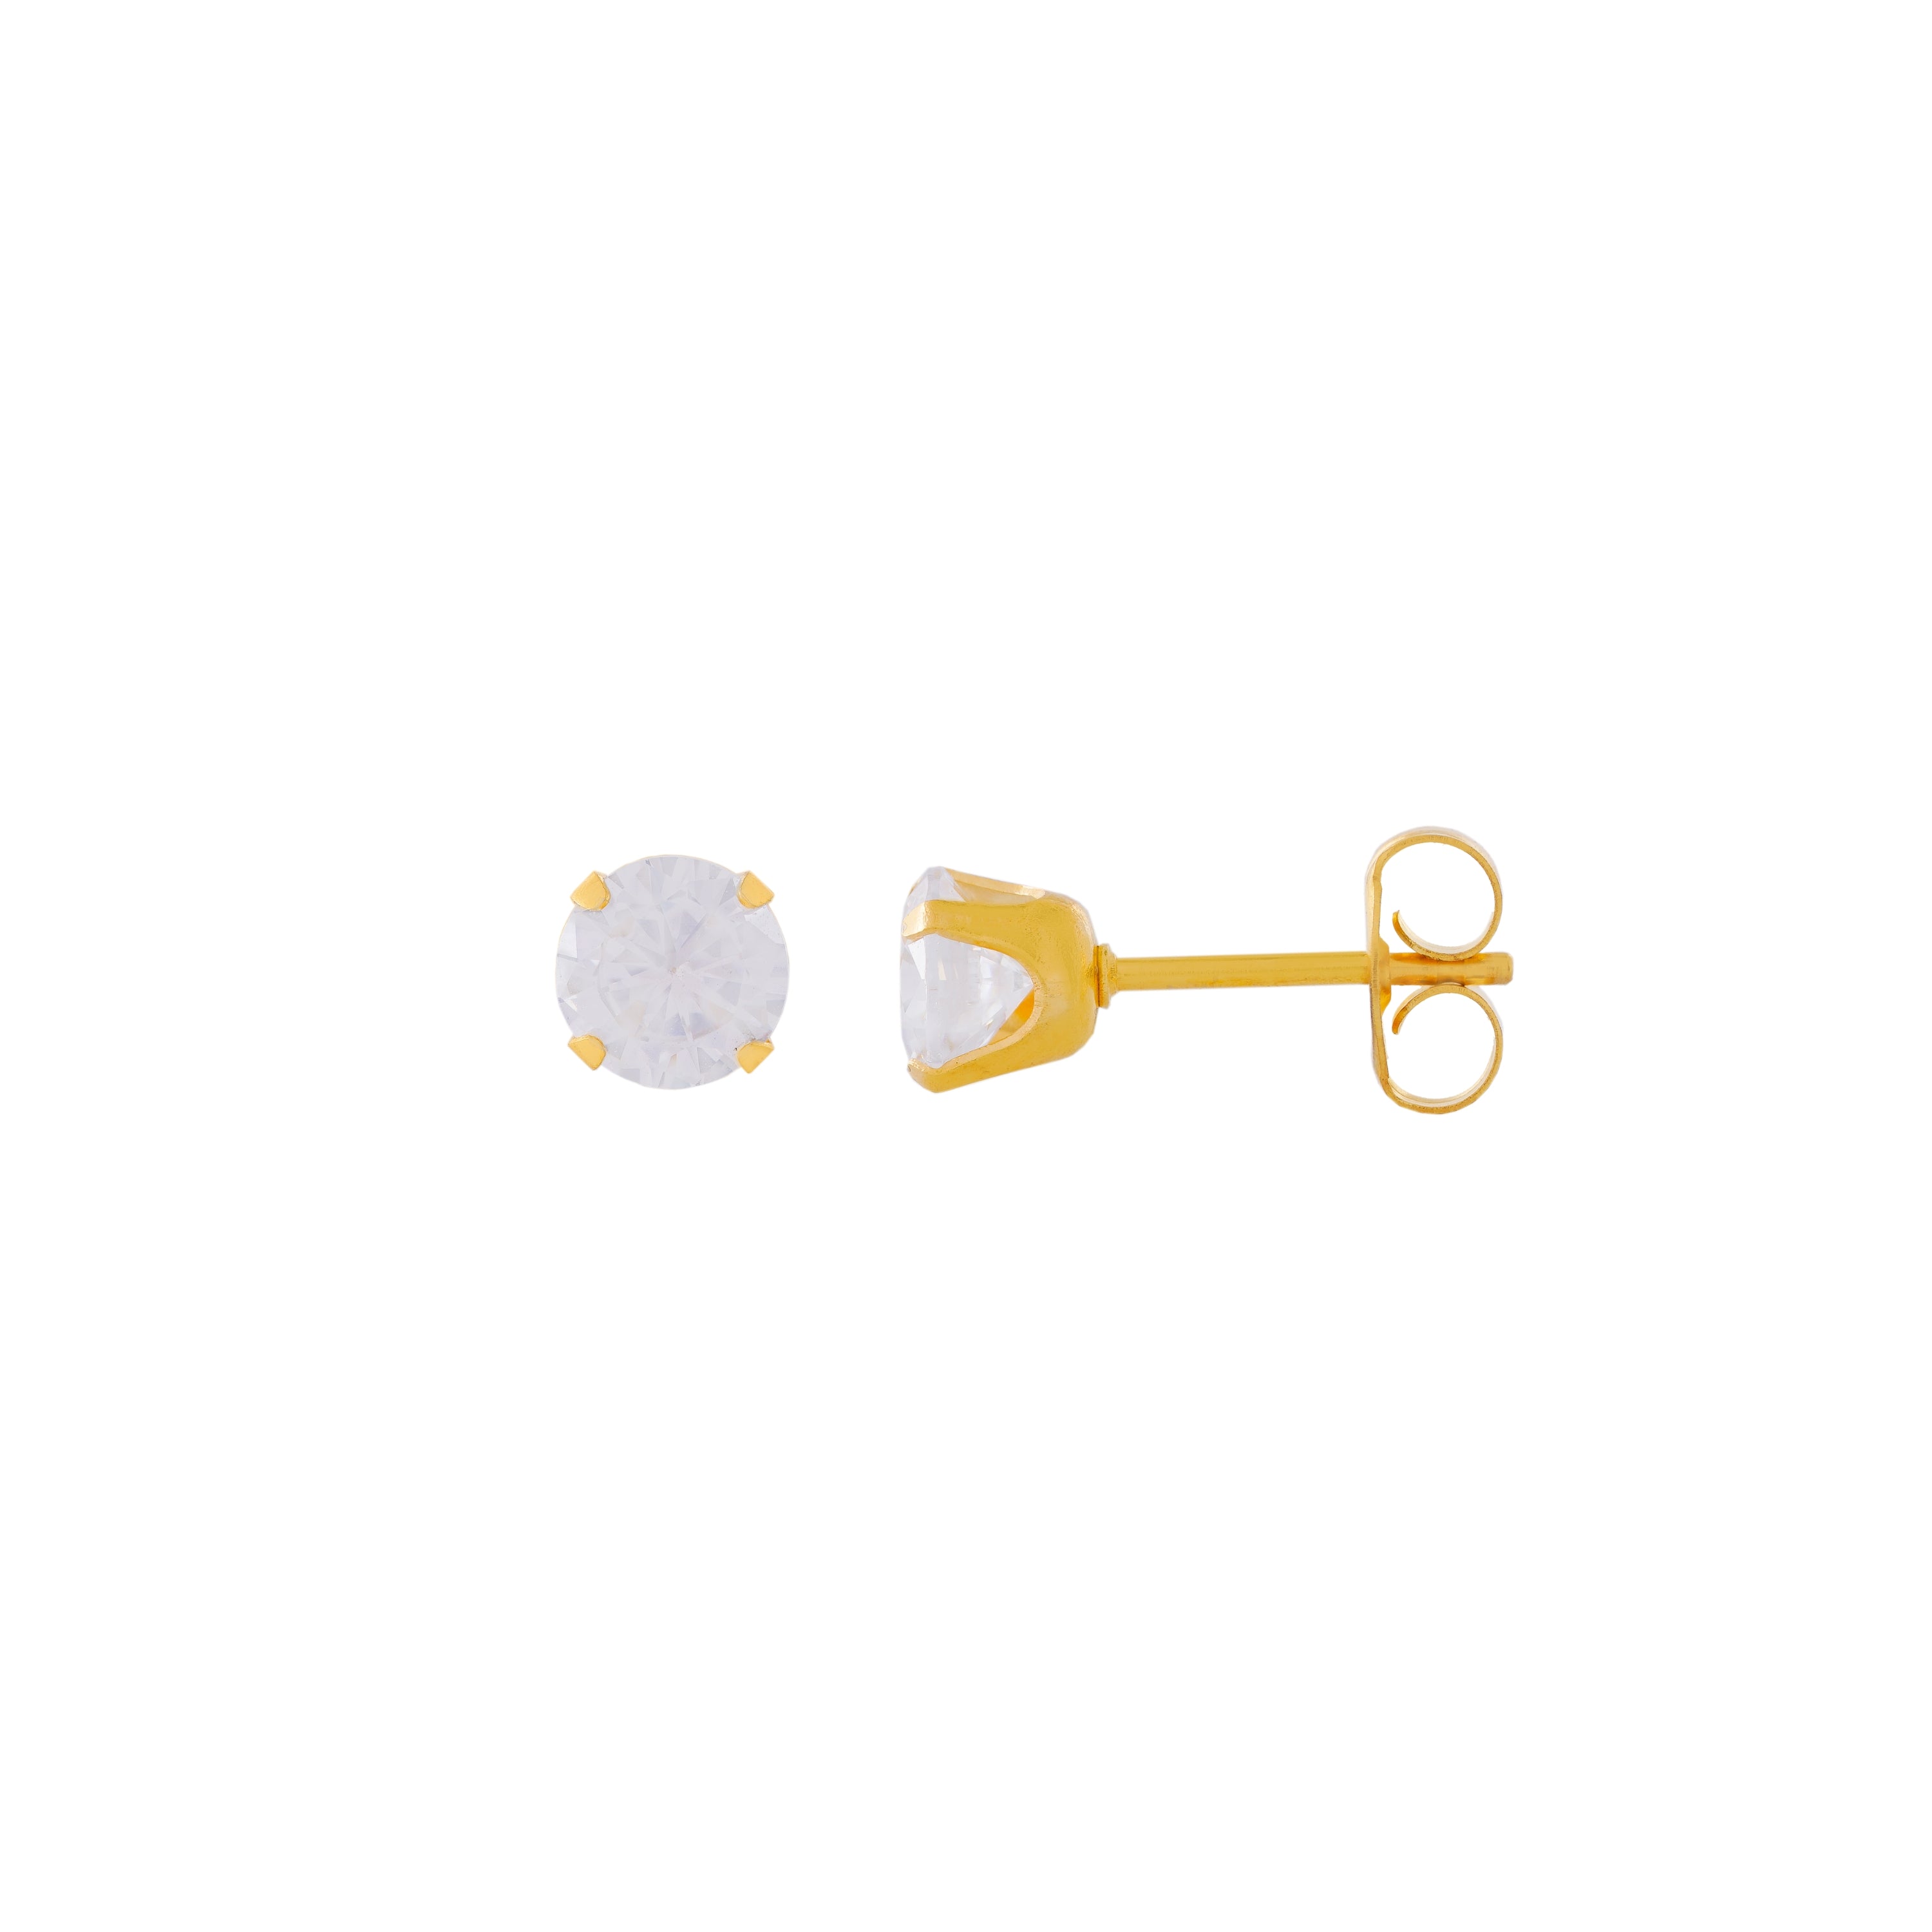 5MM Cubic Zirconia 24K Pure Gold Plated Ear Studs | MADE IN USA | Ideal for everyday wear